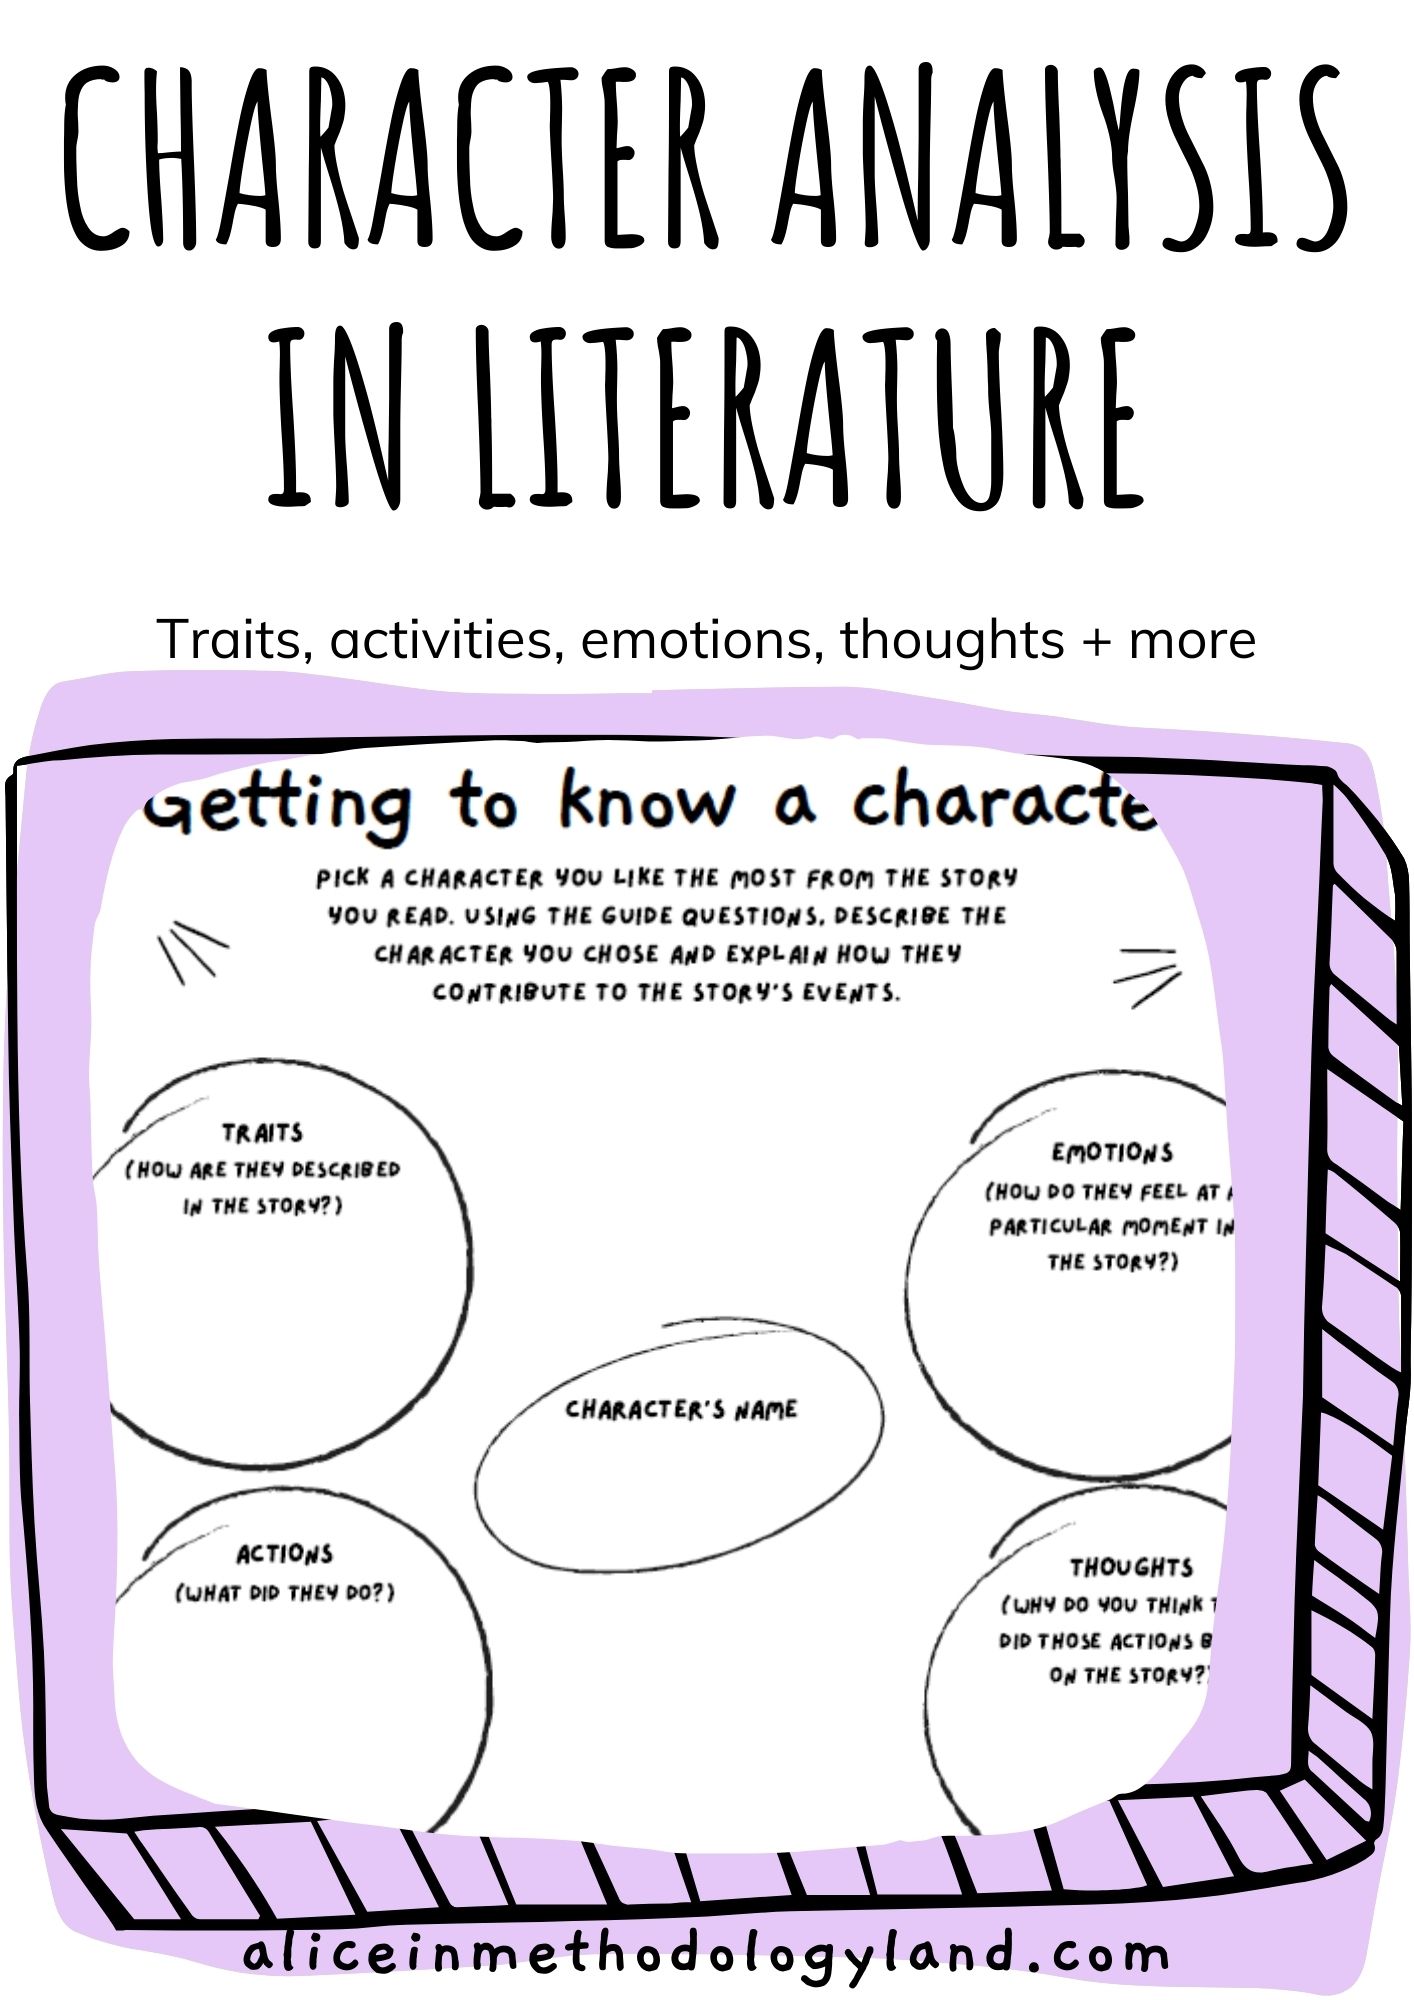 📚story Analysis Getting To Know The Character ⋆ Discover Methodologyland